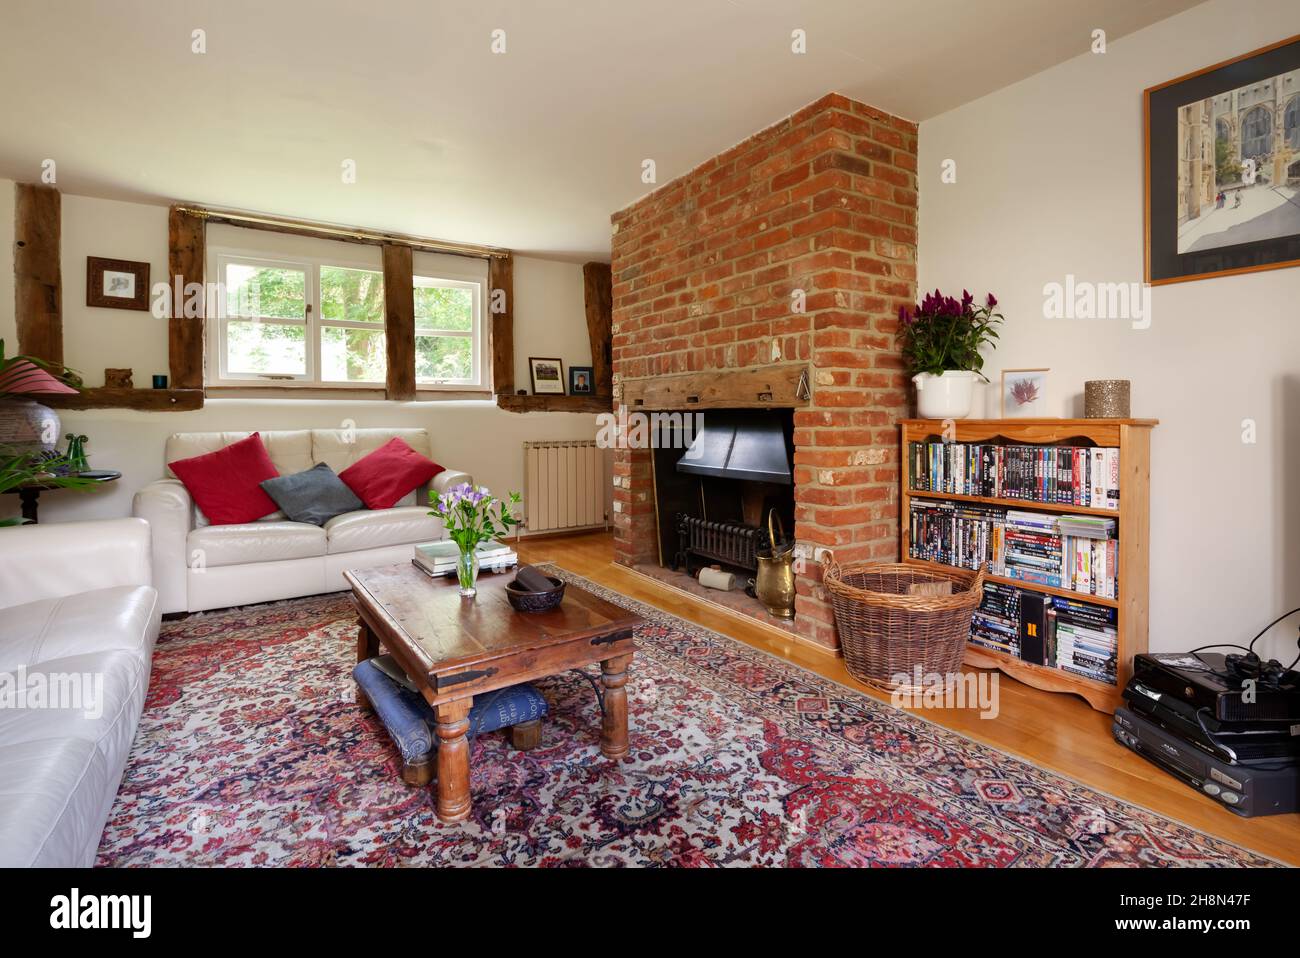 Thriplow, Cambridgeshire, England - August 9 2019: Lounge living room inside traditional british with exposed brick fireplace. Stock Photo